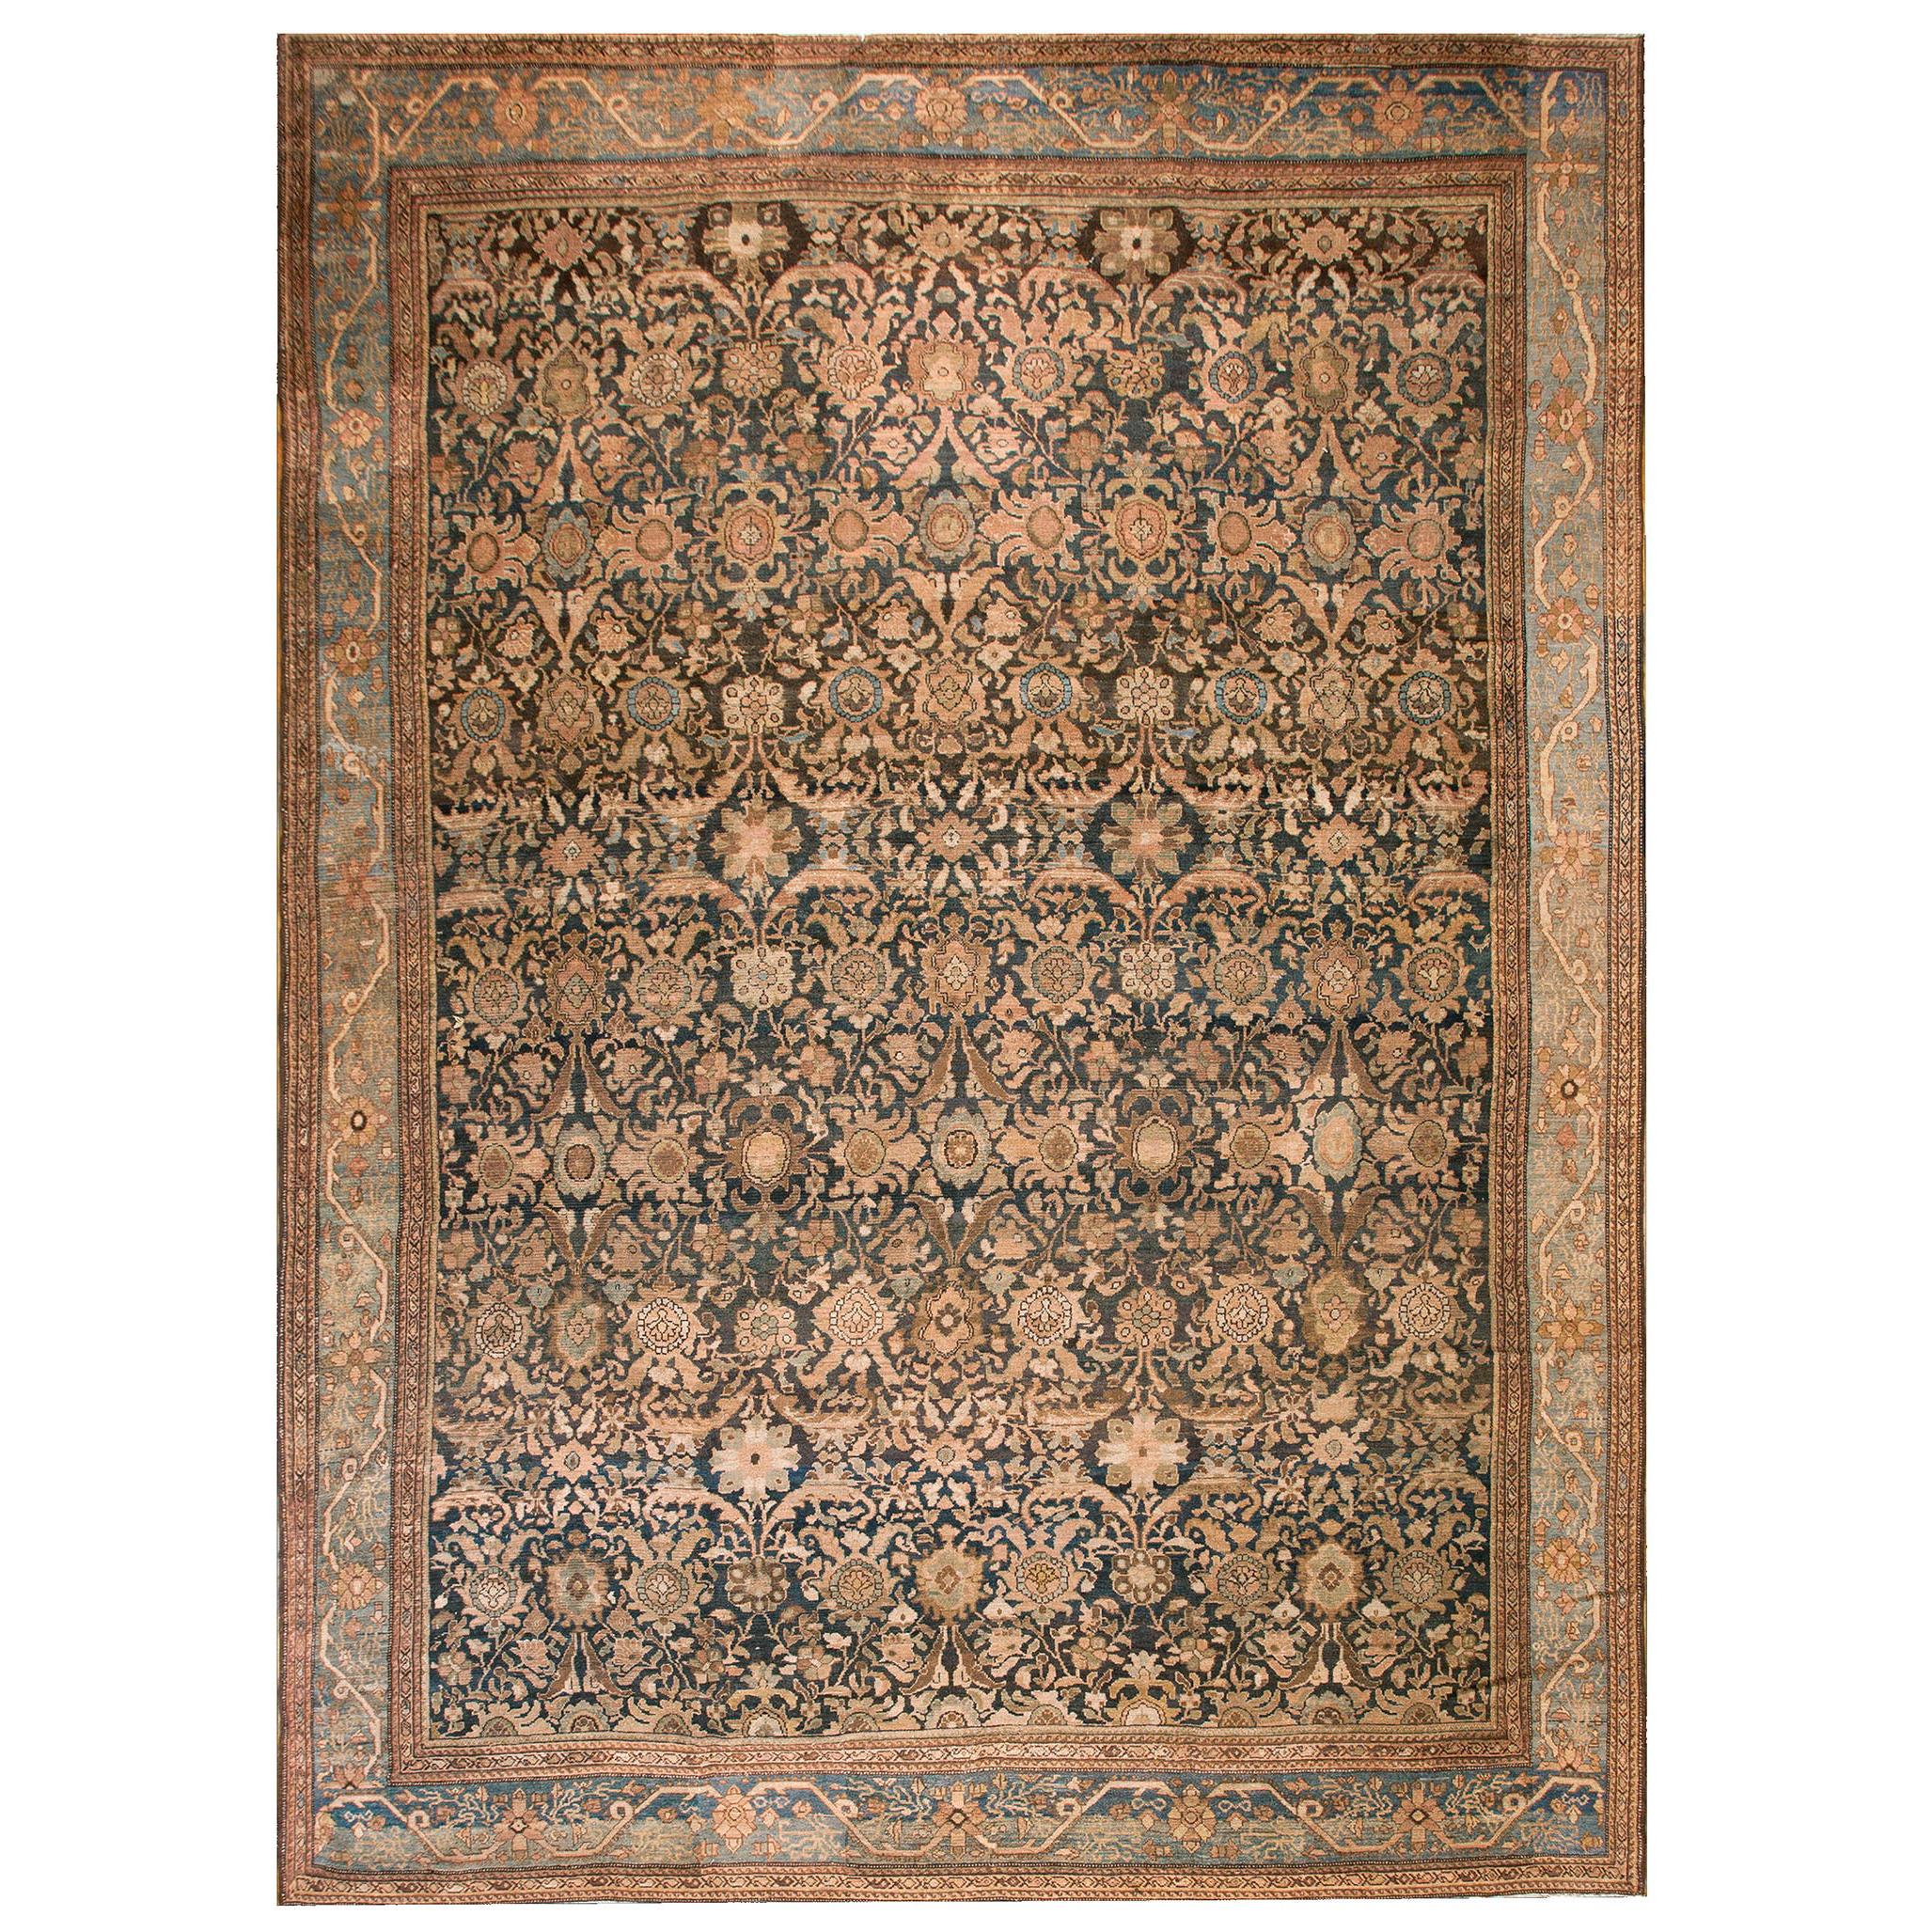 Late 19th Century Persian Malayer Carpet ( 11' 10" x 16' 6" - 360 x 503 cm) For Sale